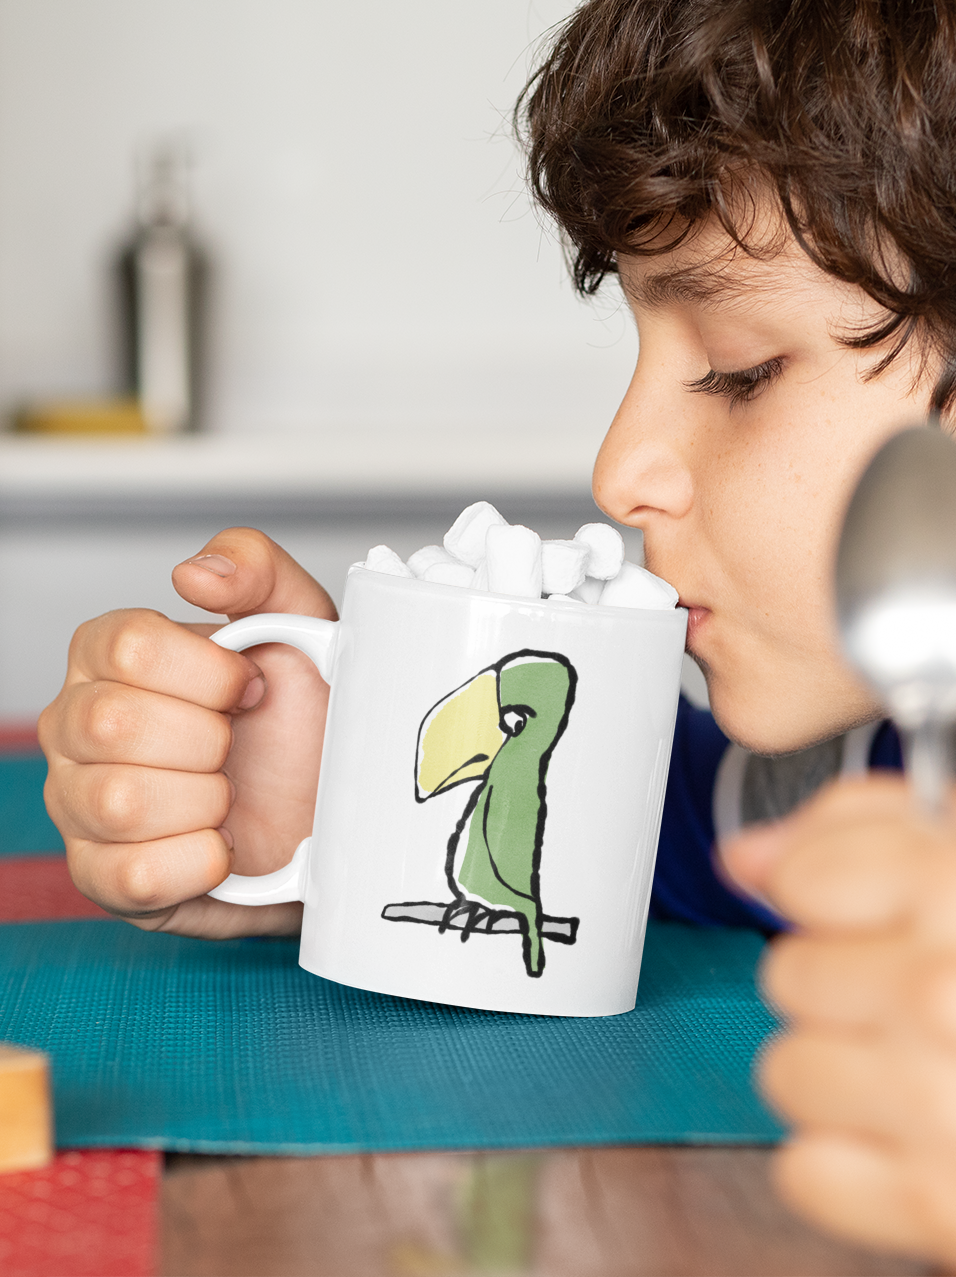 Boy sips from a Funny Peter Parrot mug - Original Illustrated Parrot design on a coffee mug by Hector and Bone